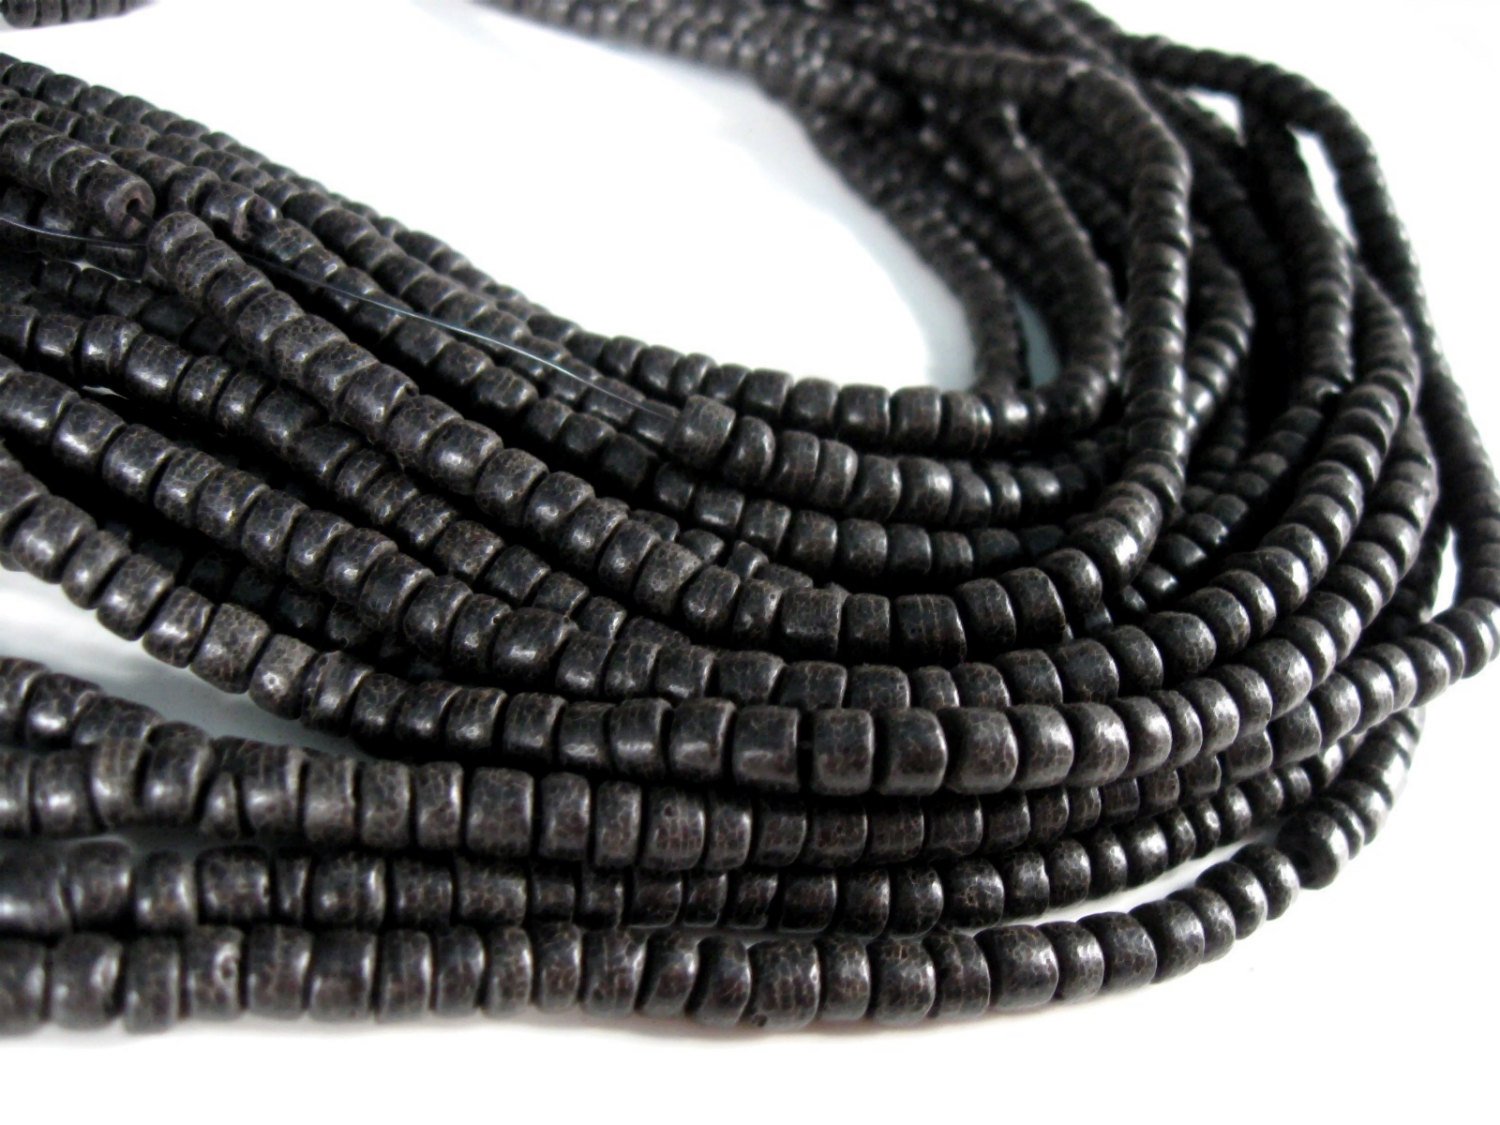 110 Black wood Beads - Coconut Rondelle Disk Beads 5mm